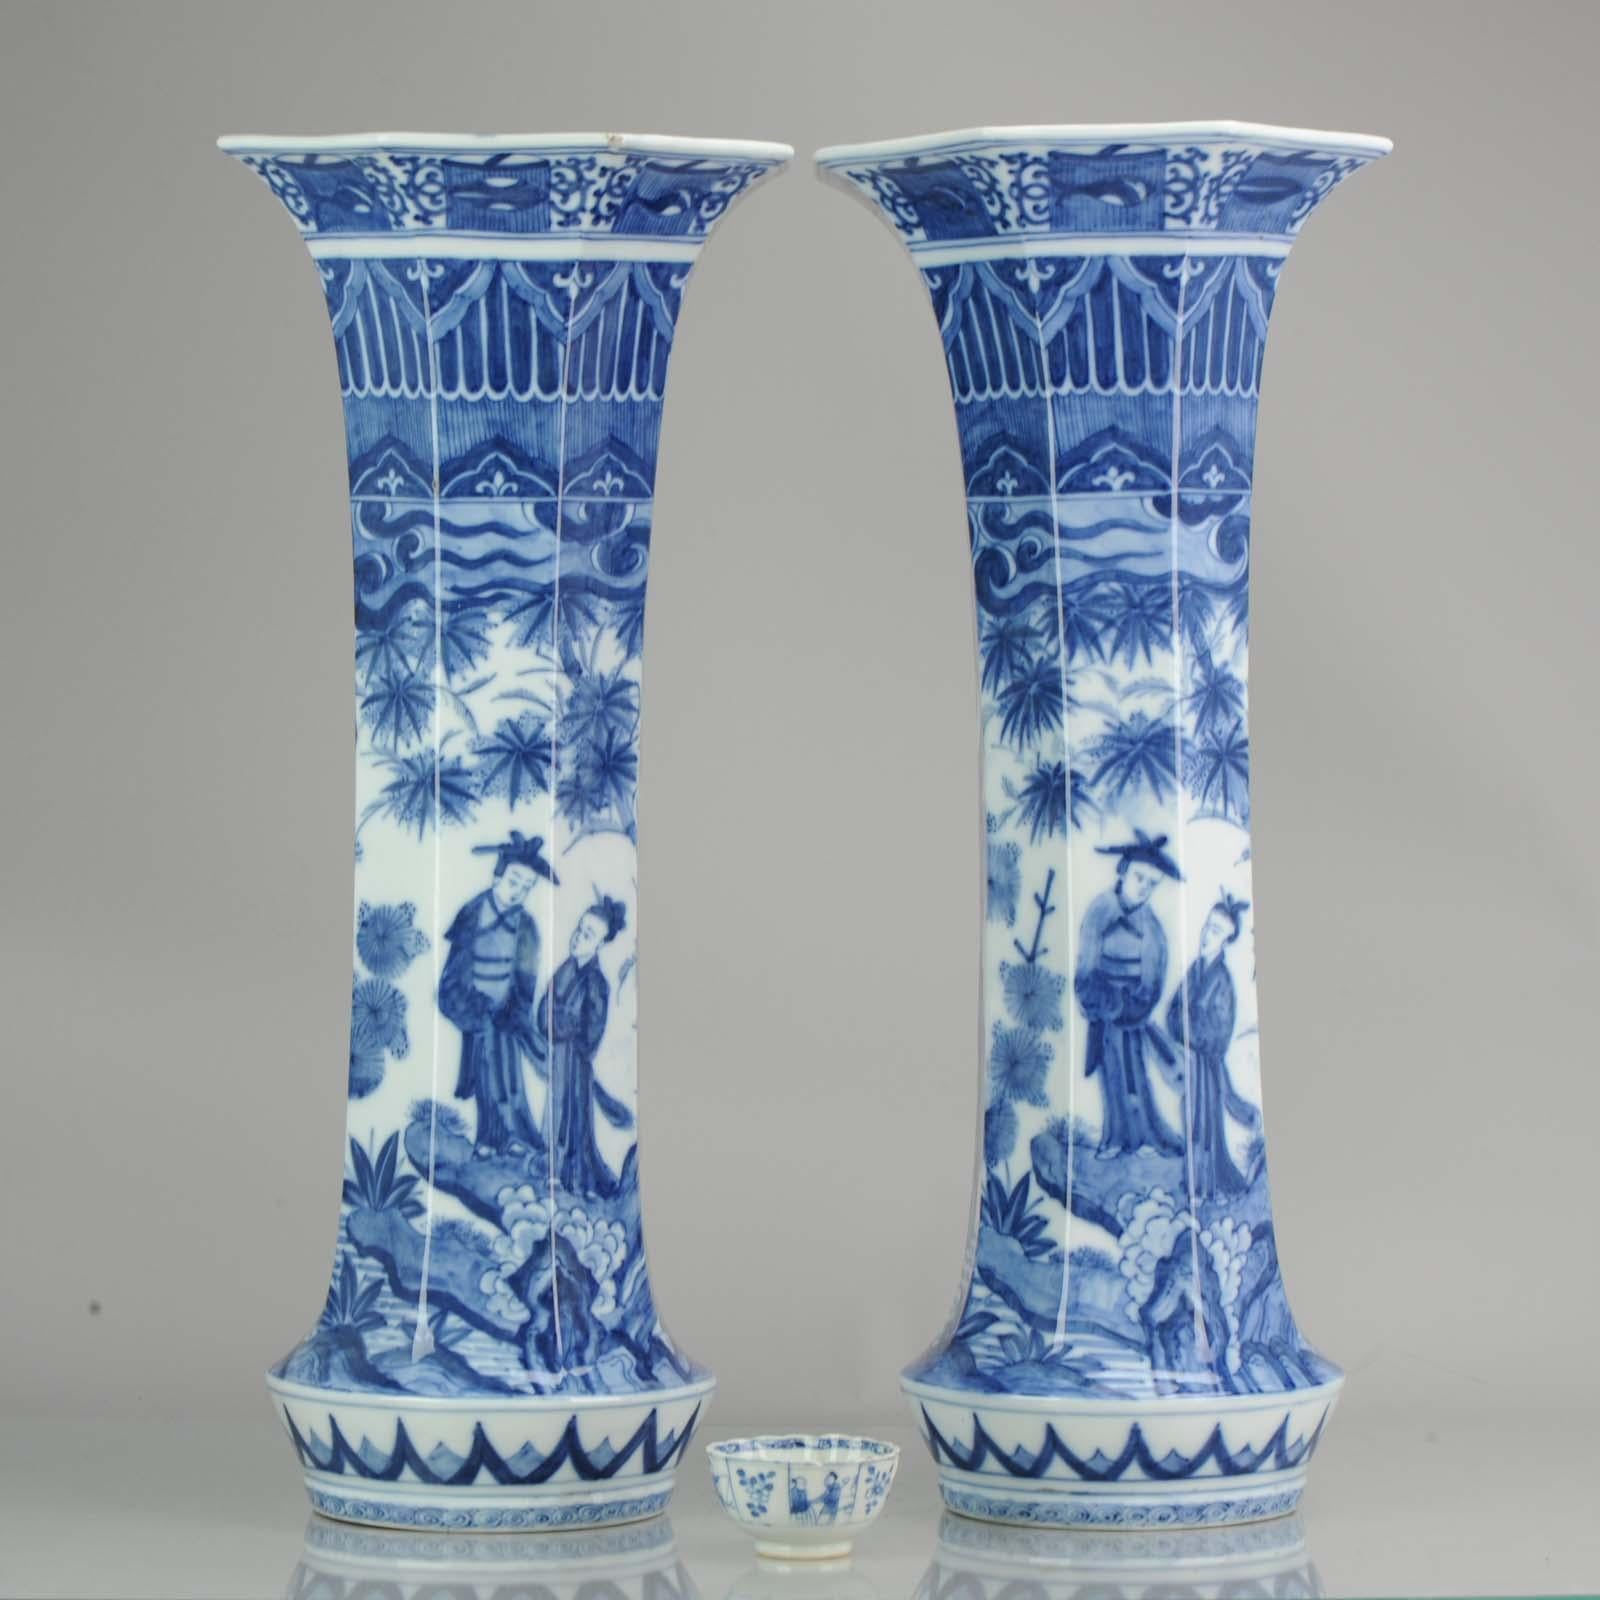 A great pair of two octagonal vases, underglaze blue and white, 19th-20th century Meiji/T period.

In stunning condition.
Condition:
Overall condition; 1 chip to rim and 1 flint from base rim. Size: 520 mm approximate
Period:
circa 1900.